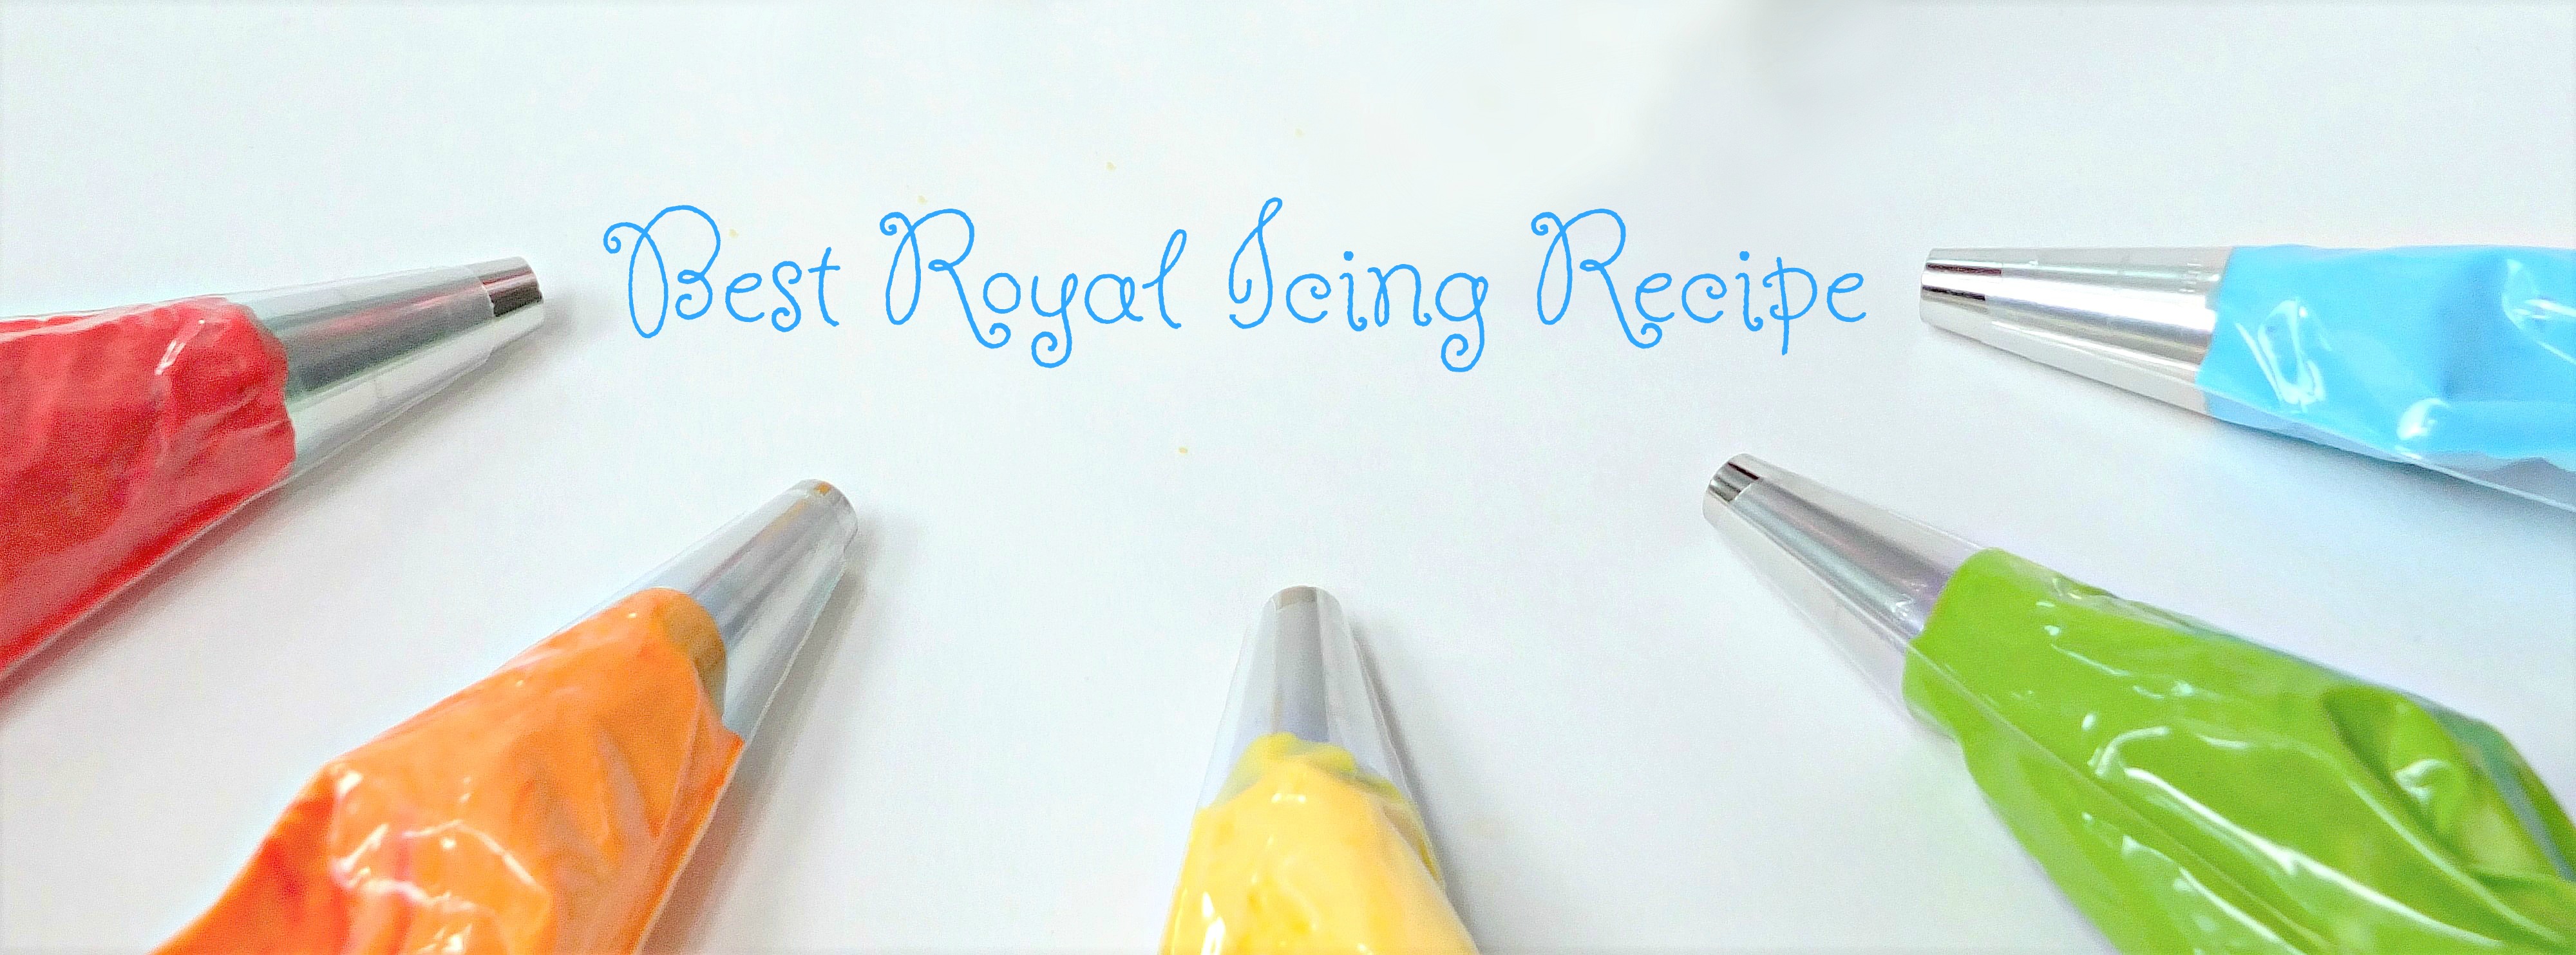 Best Royal Icing Recipe, easy royal icing recipe, meringue powder royal icing recipe, eggless icing